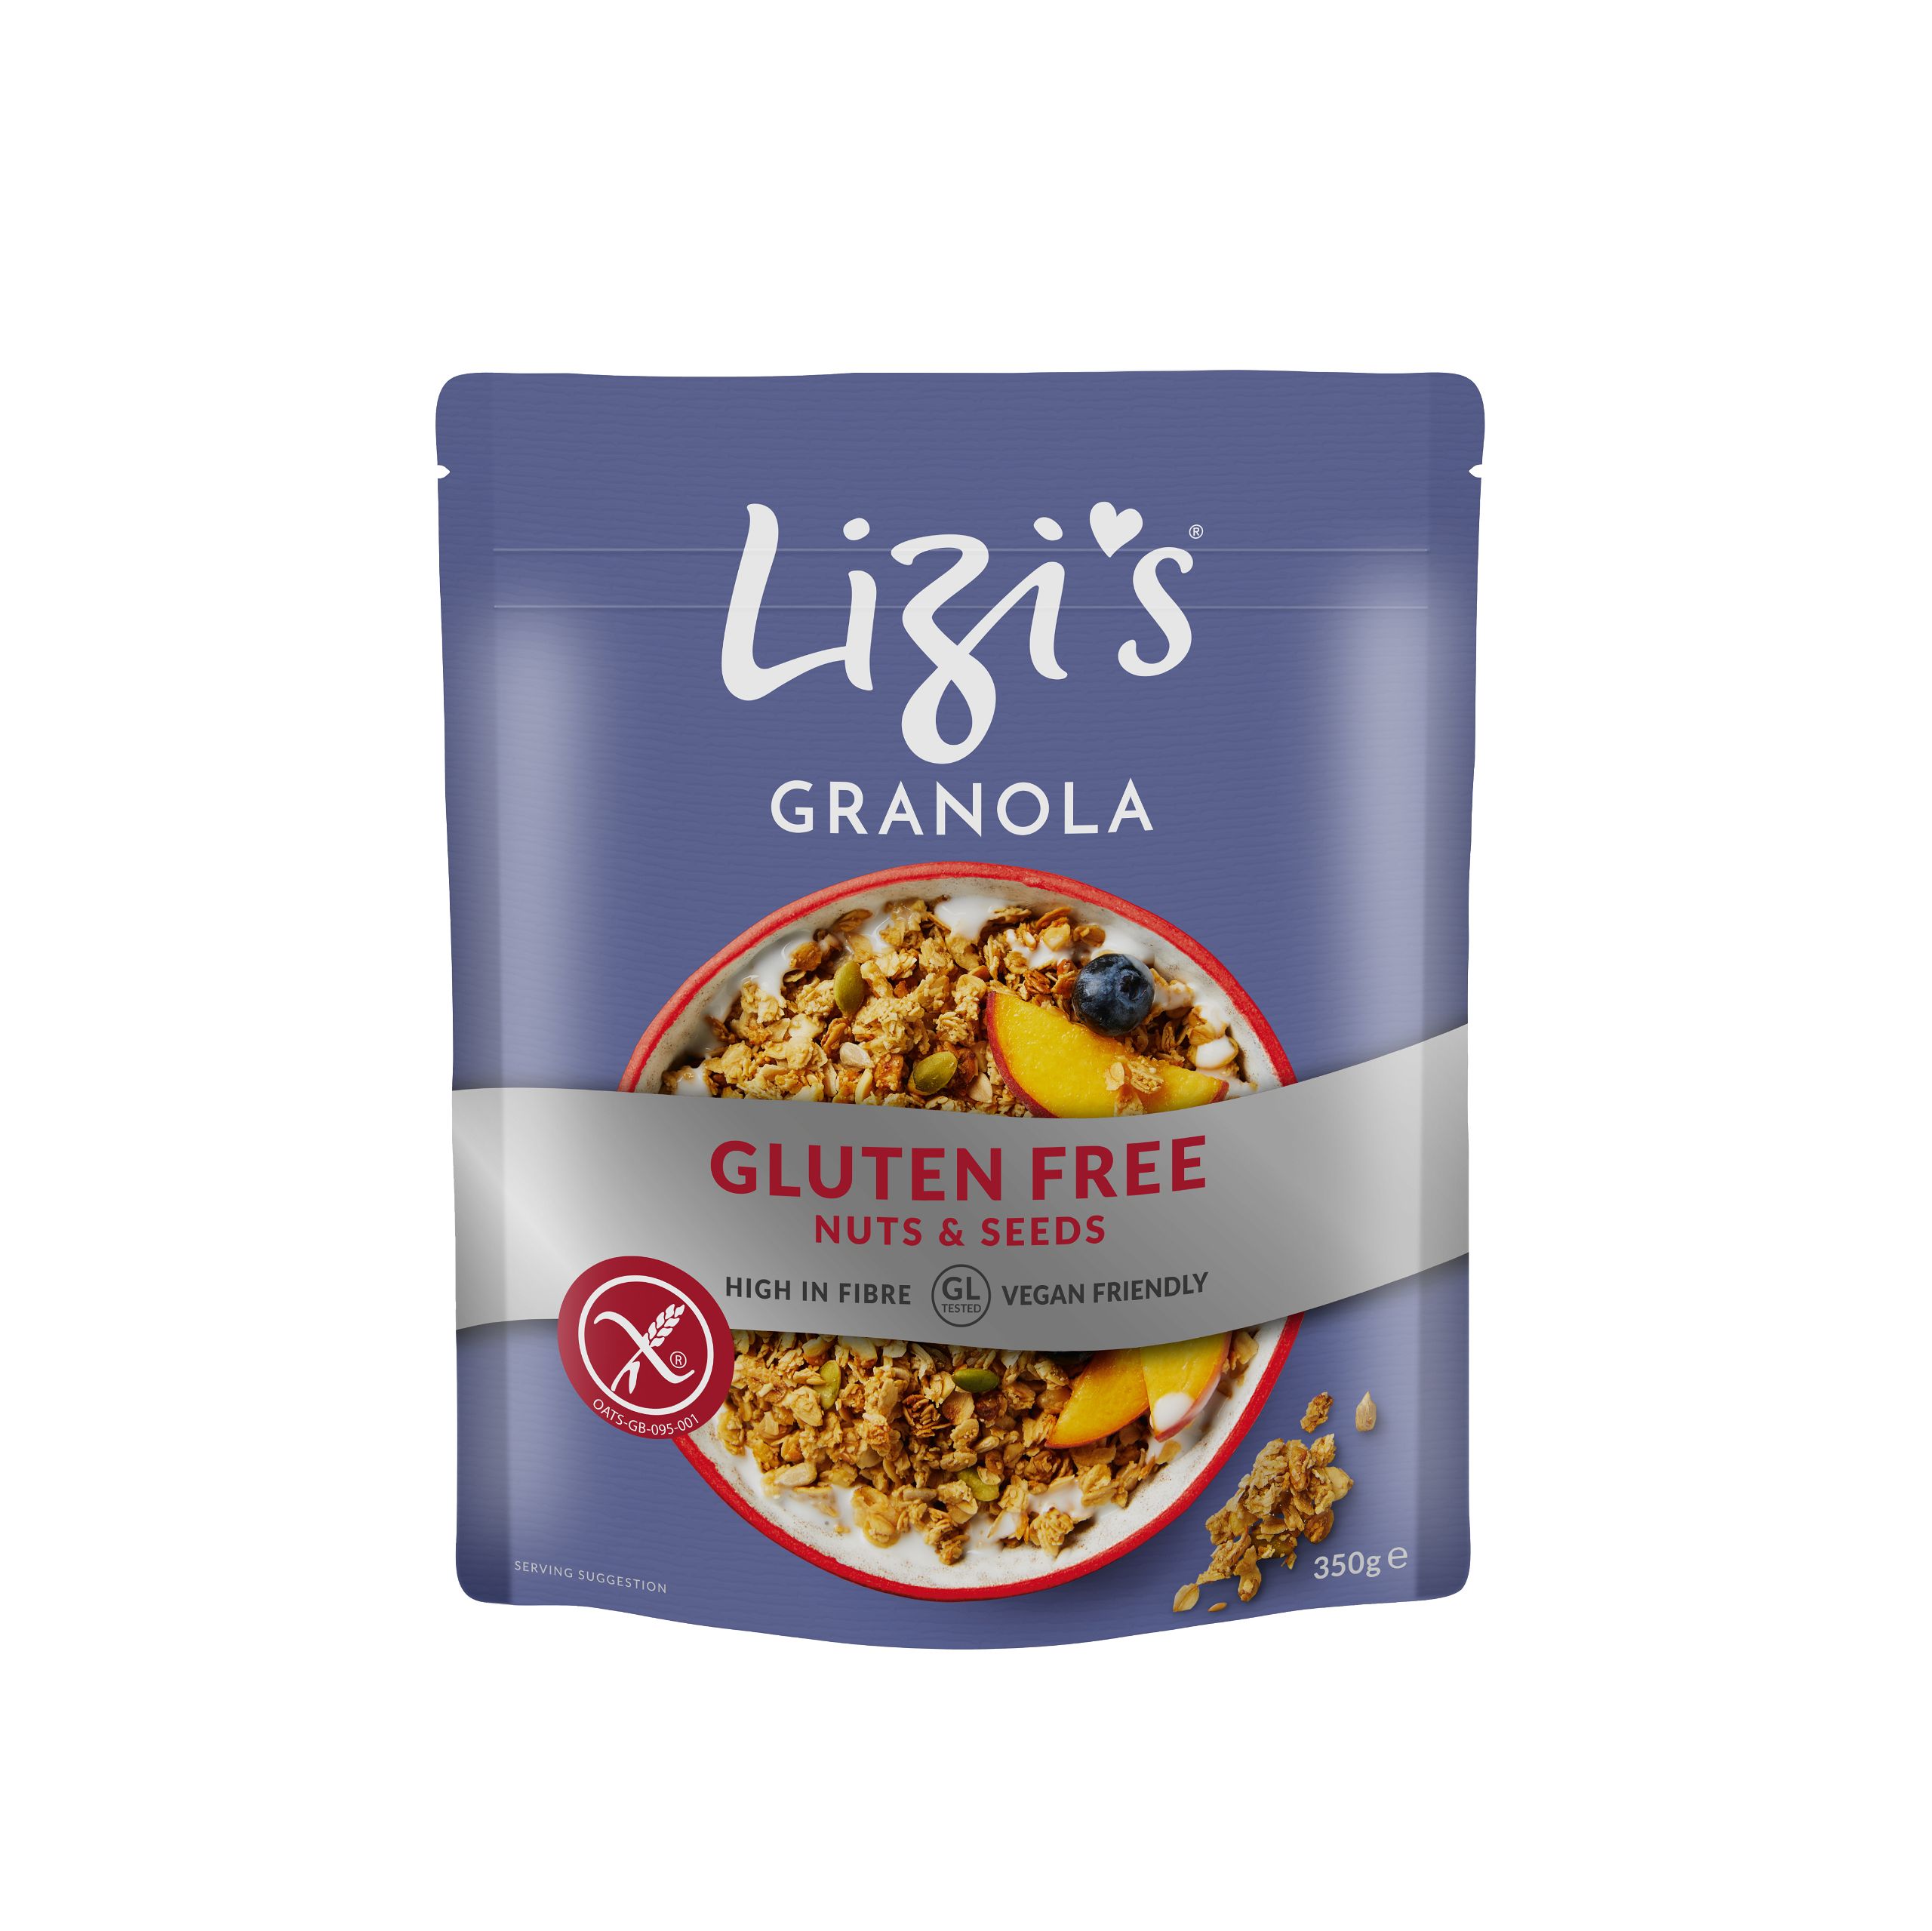 Gluten Free Nuts and Seeds Granola - Image